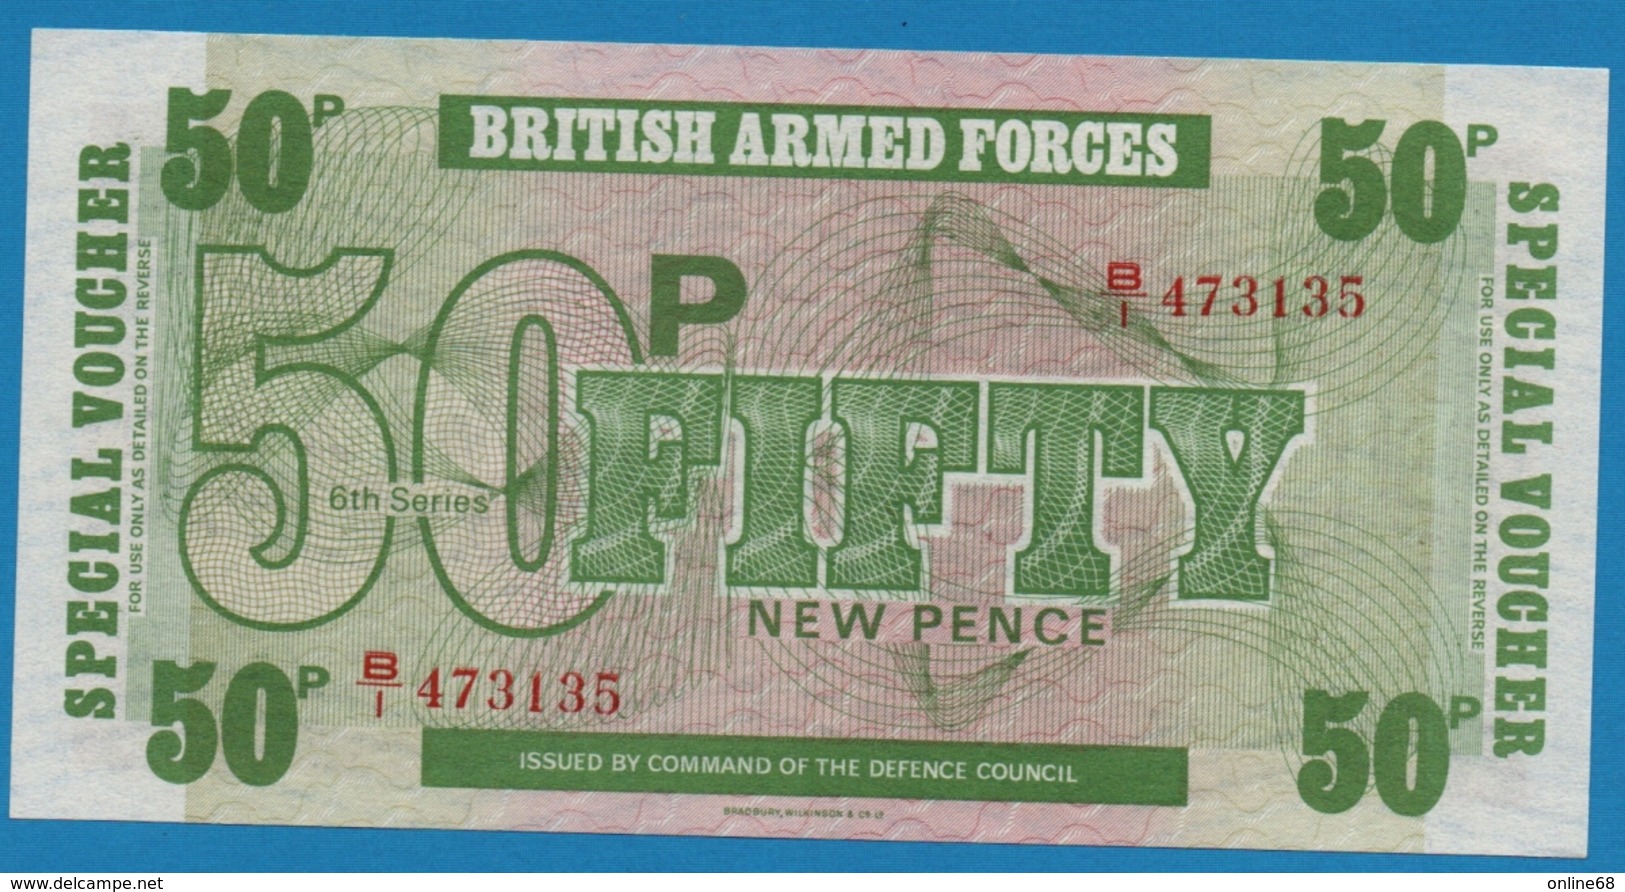 GB BAF 50 NEW PENCE (1972) Alpha B1/473135 "6th Series" - British Armed Forces & Special Vouchers